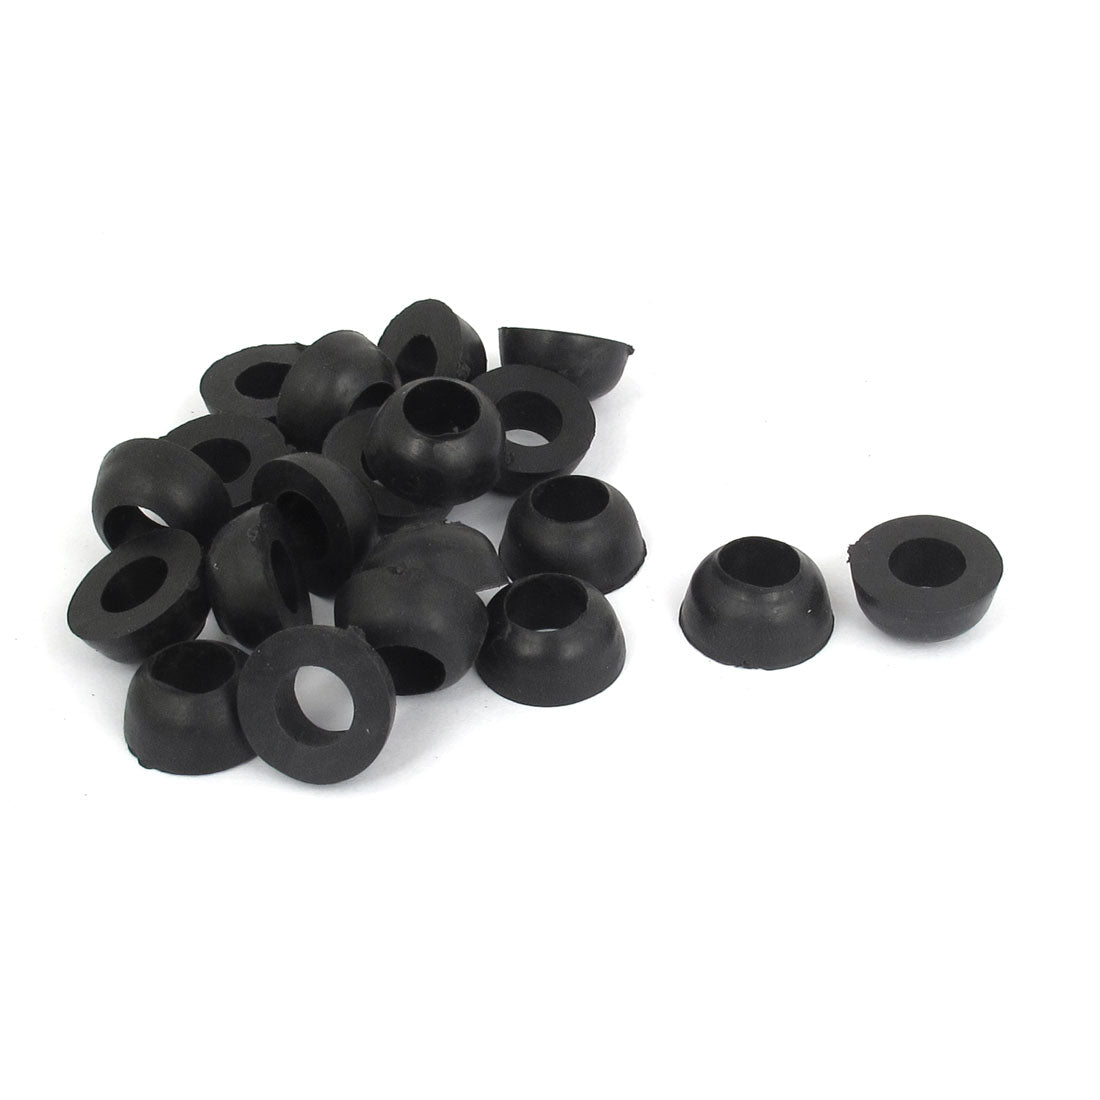 uxcell Uxcell 20 Pcs 18mm x 9mm Black Rubber O Ring Seal Sealing Washer Gasket Grommet